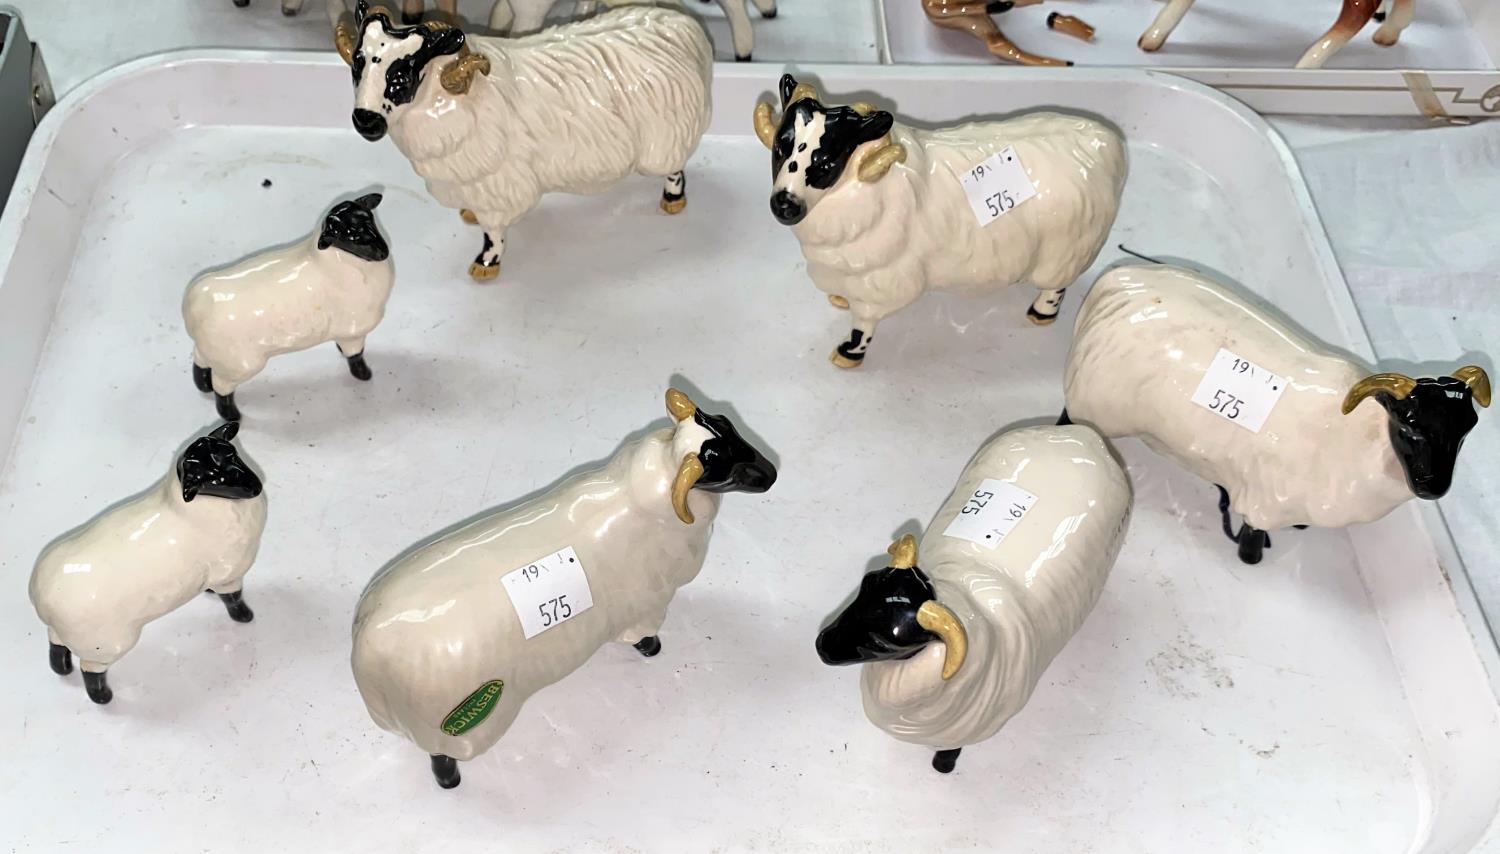 Three Beswick Black faced sheep 1765, and two black faced rams 3071 and two black face lambs 1828